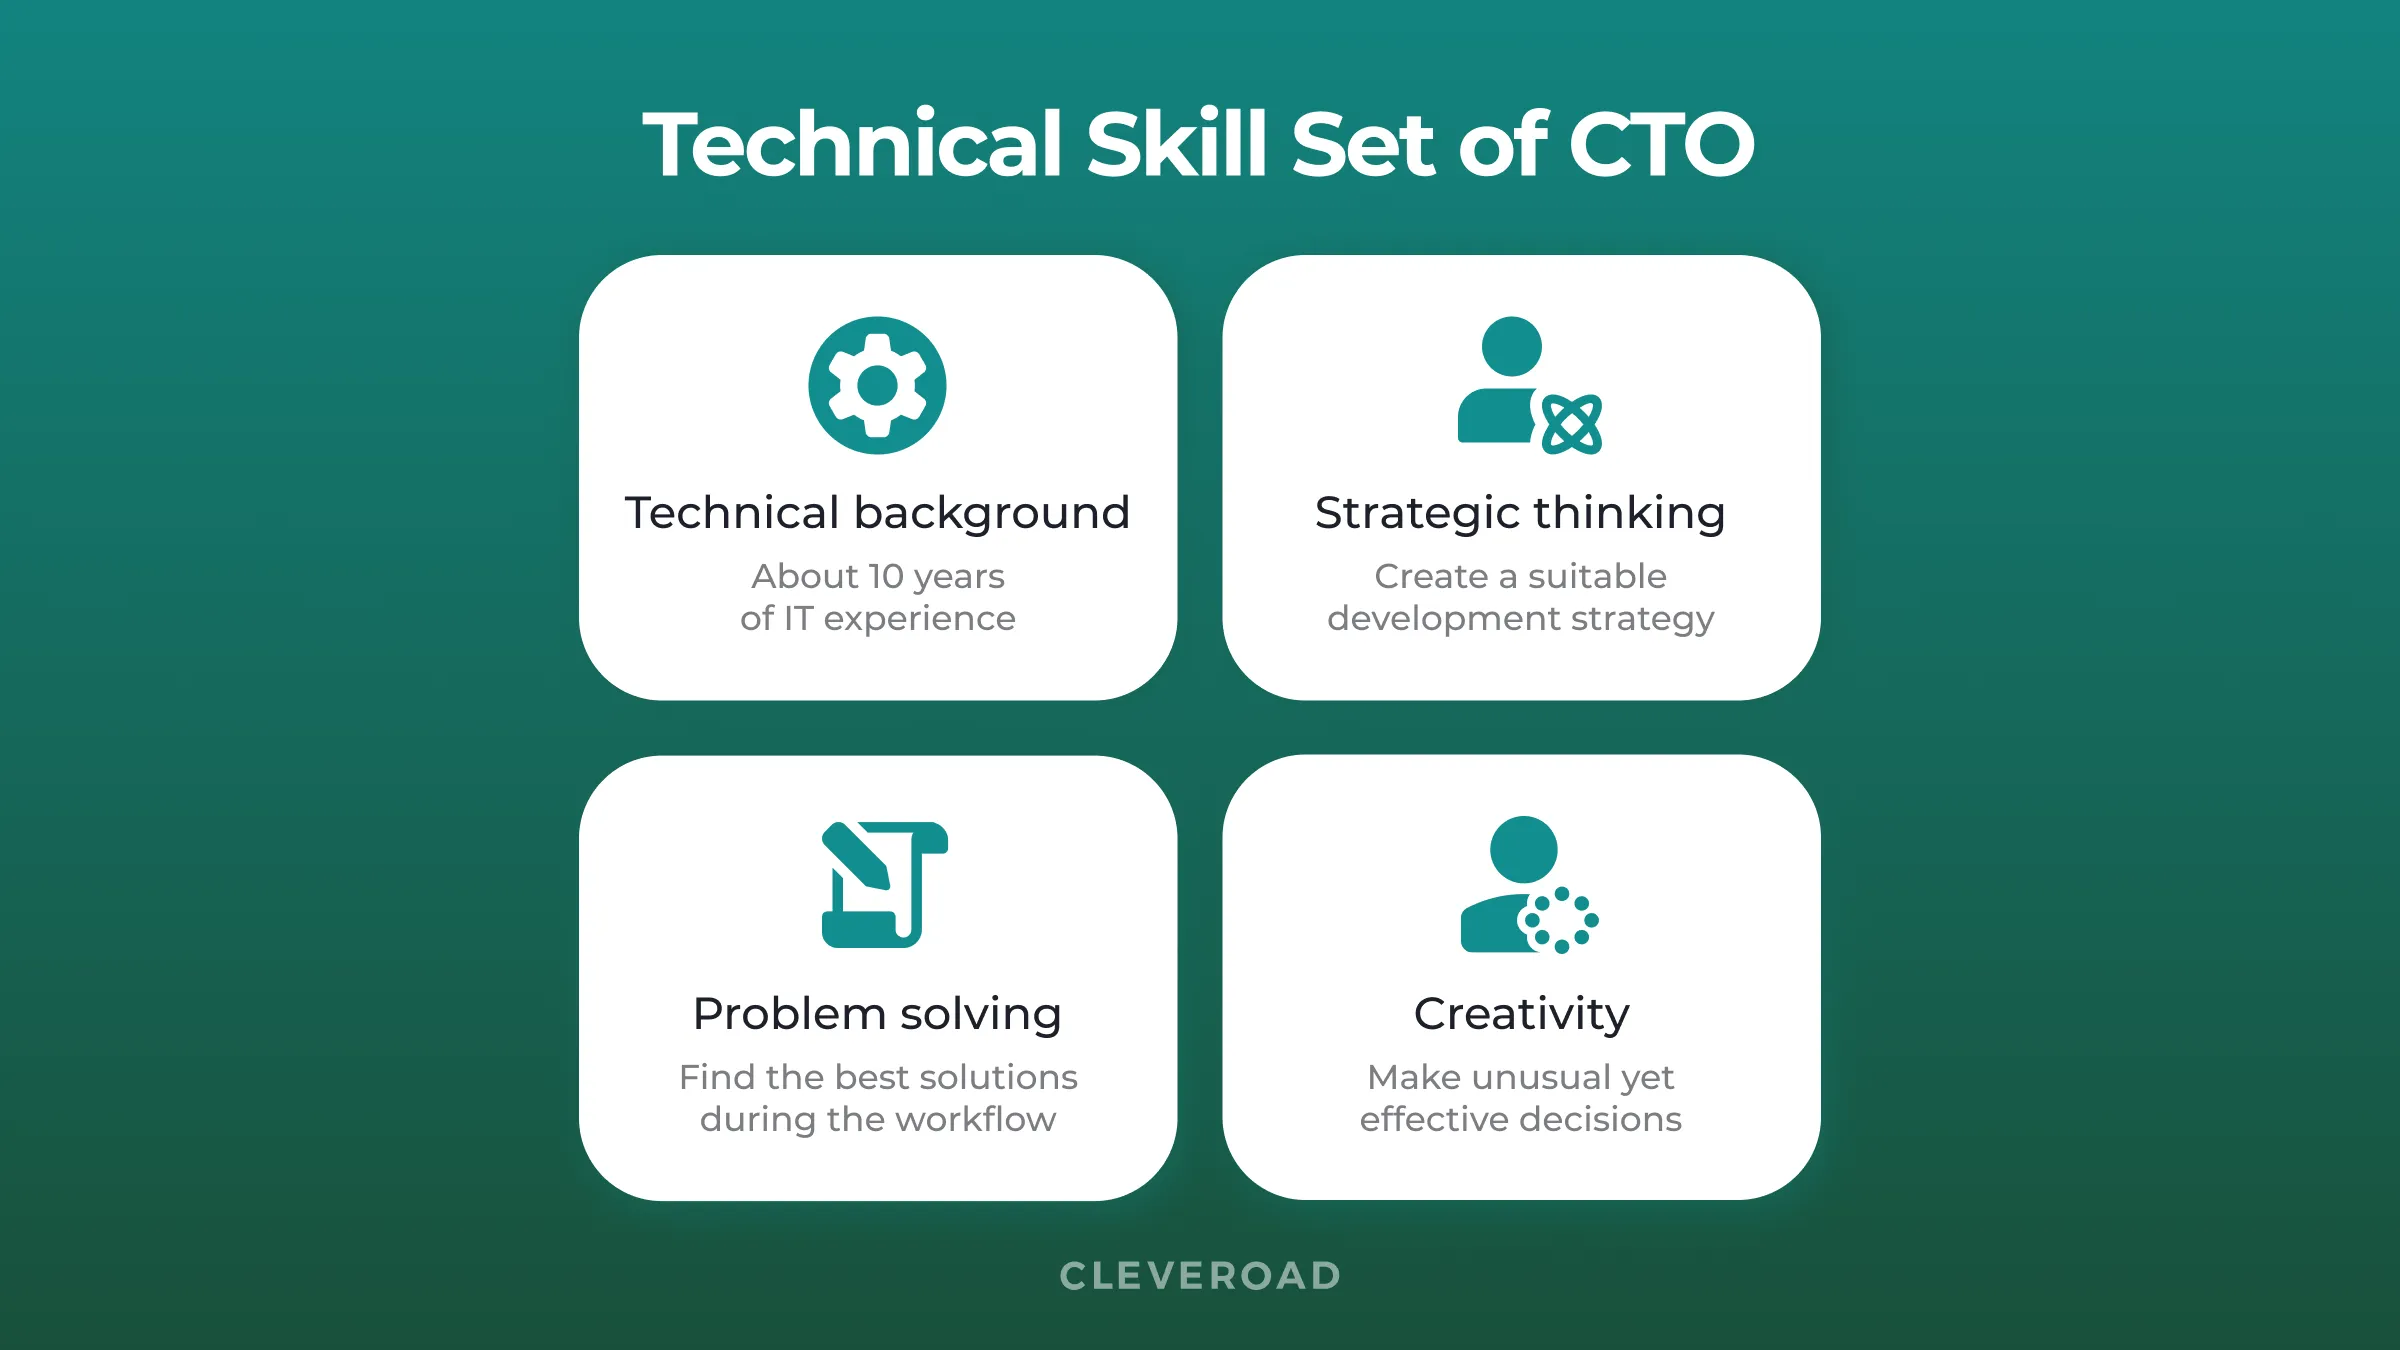 A technical skill set  for CTO